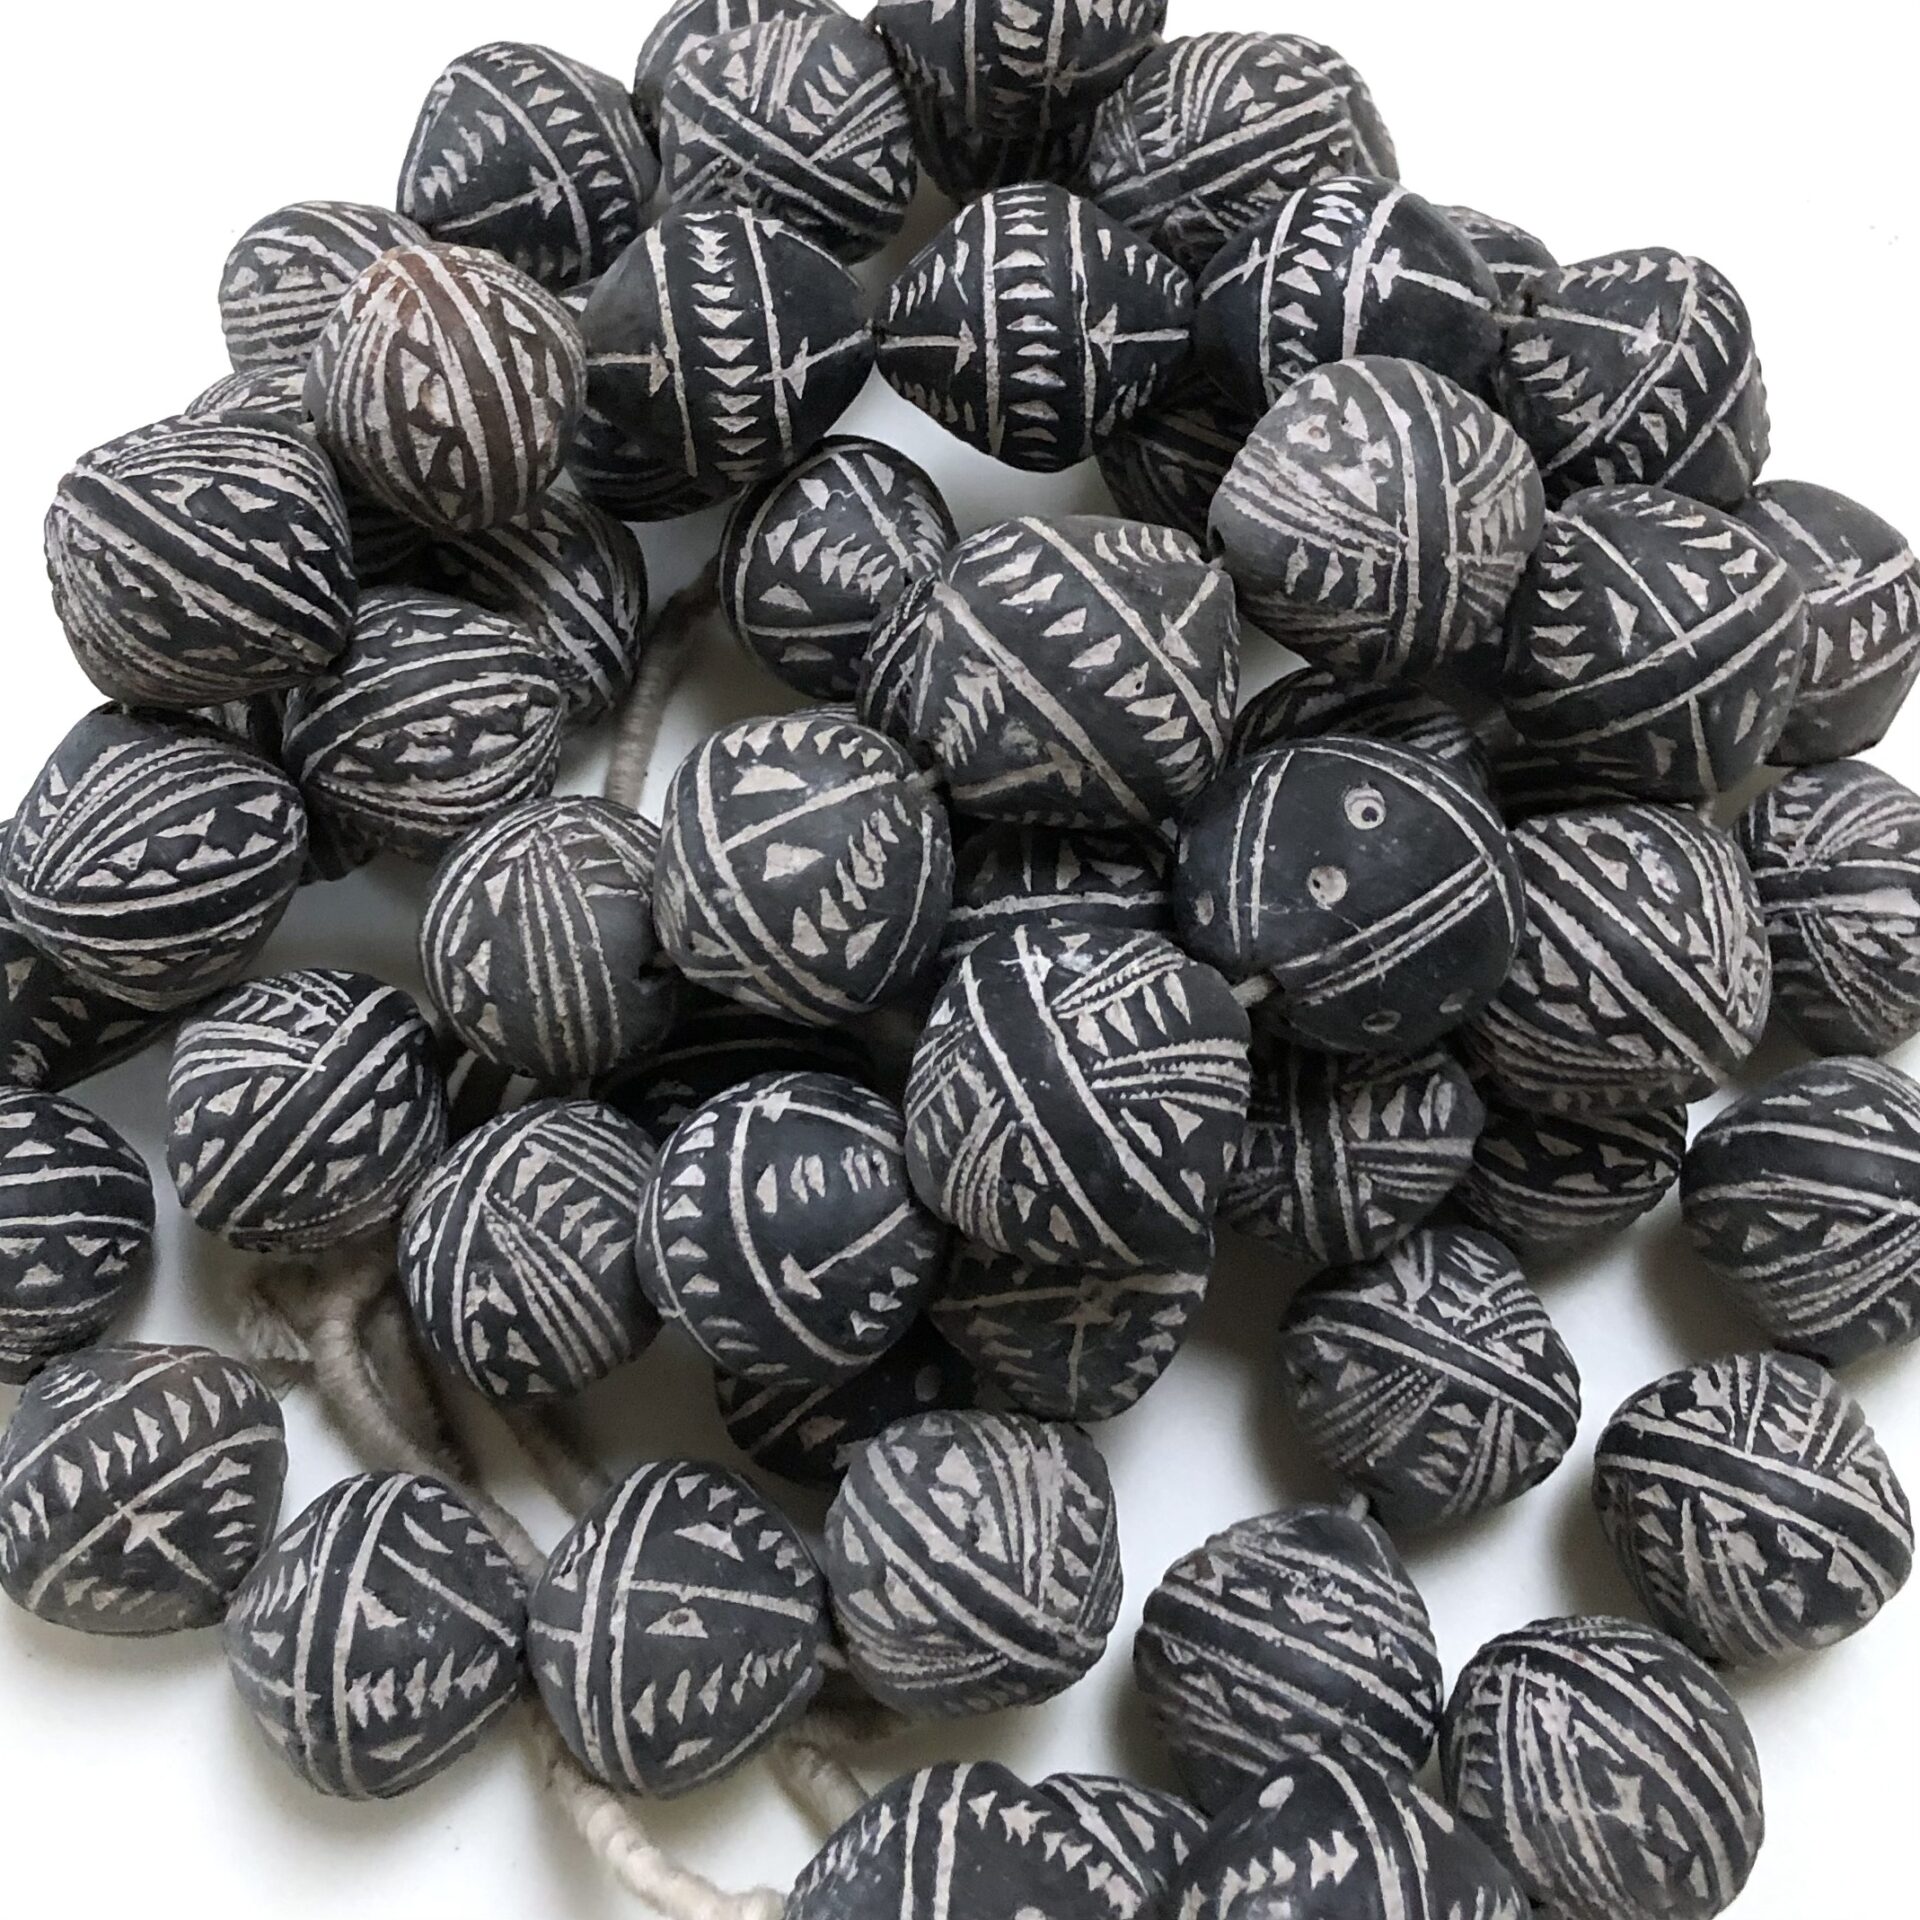 Thebeadchest Black Terracotta Round Mali Clay Beads 11mm African 27 inch Strand Handmade, Adult Unisex, Size: One Size